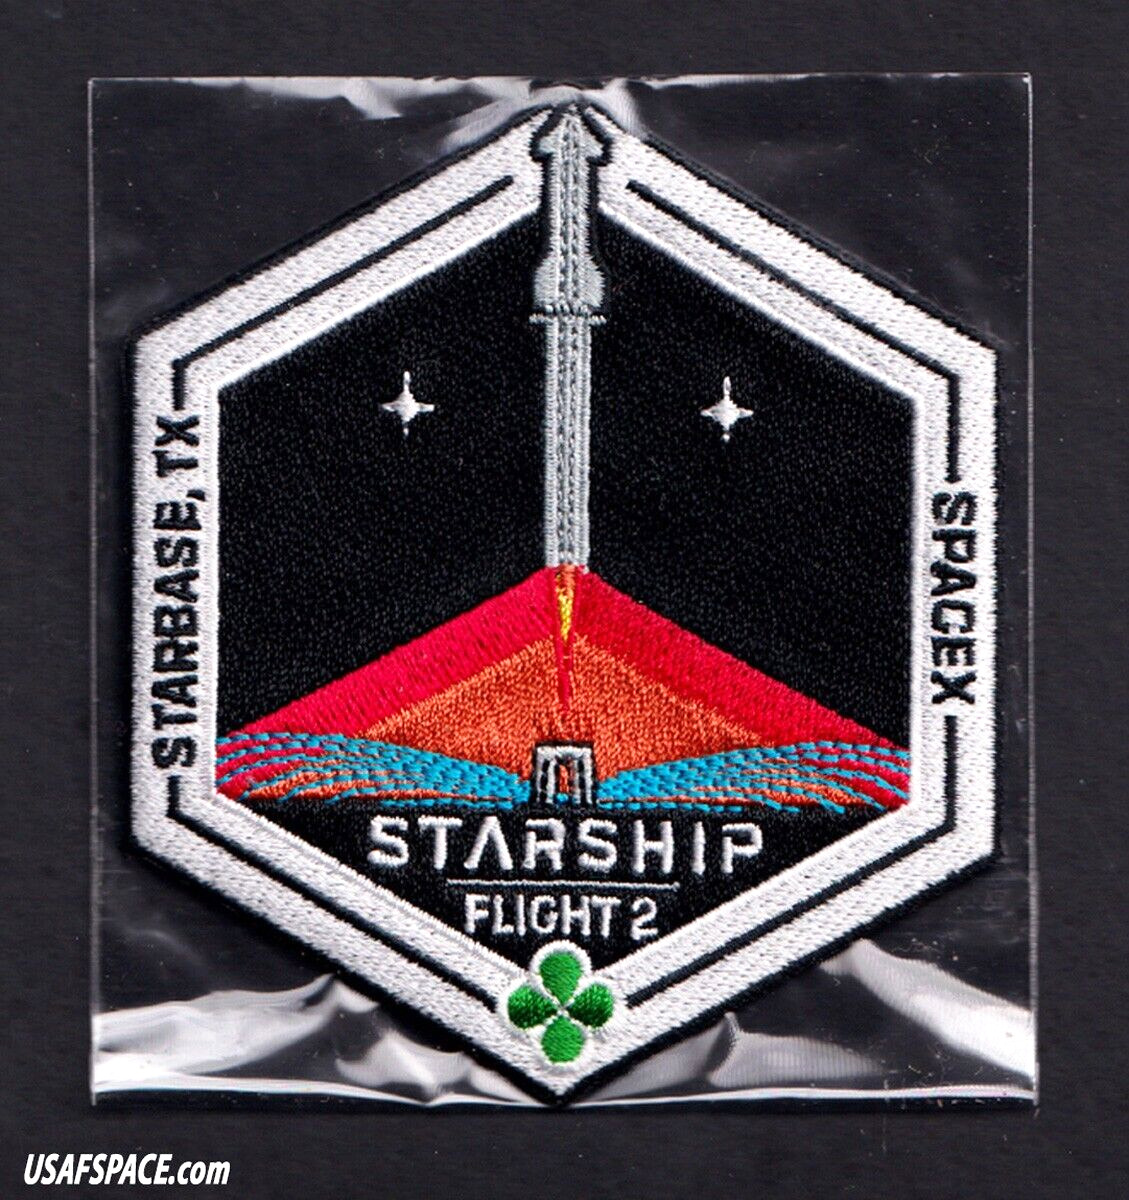 Authentic SPACEX -STARSHIP TEST FLIGHT-2 -SUPER HEAVY-STARBASE, TX-Mission PATCH